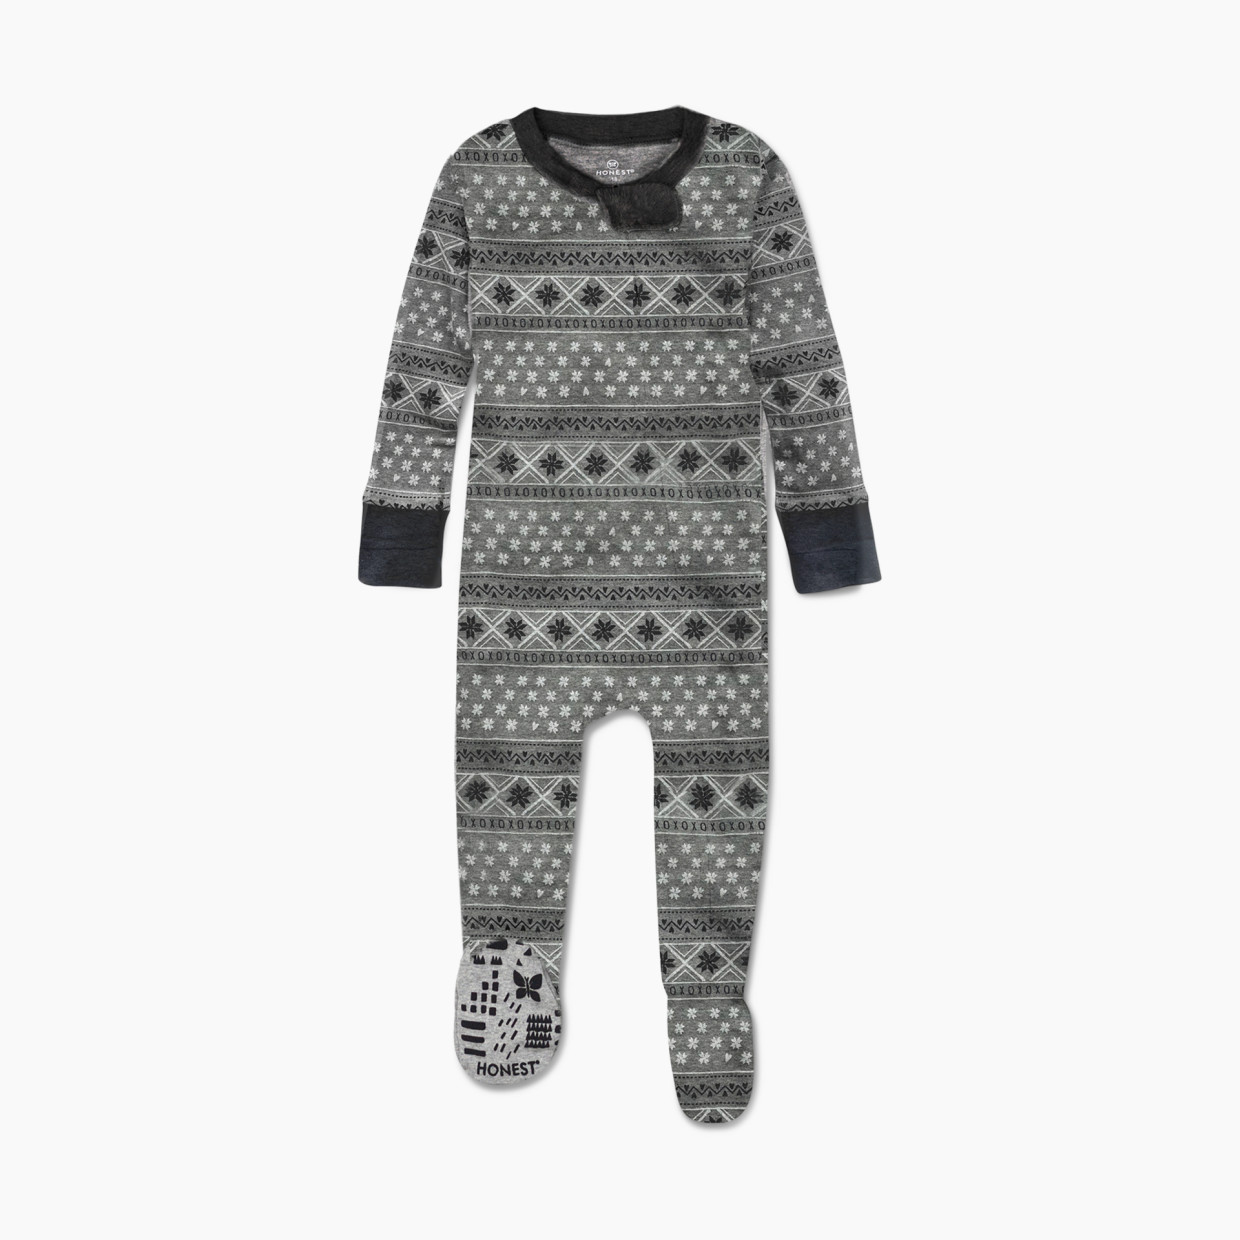 Honest Baby Clothing Toddler Heather Grey Fair Isle "Fam Jam" Snug Fit Footed Matching Family Pajamas - Pajama Chic Heather Grey Fair Isle, 18 M.